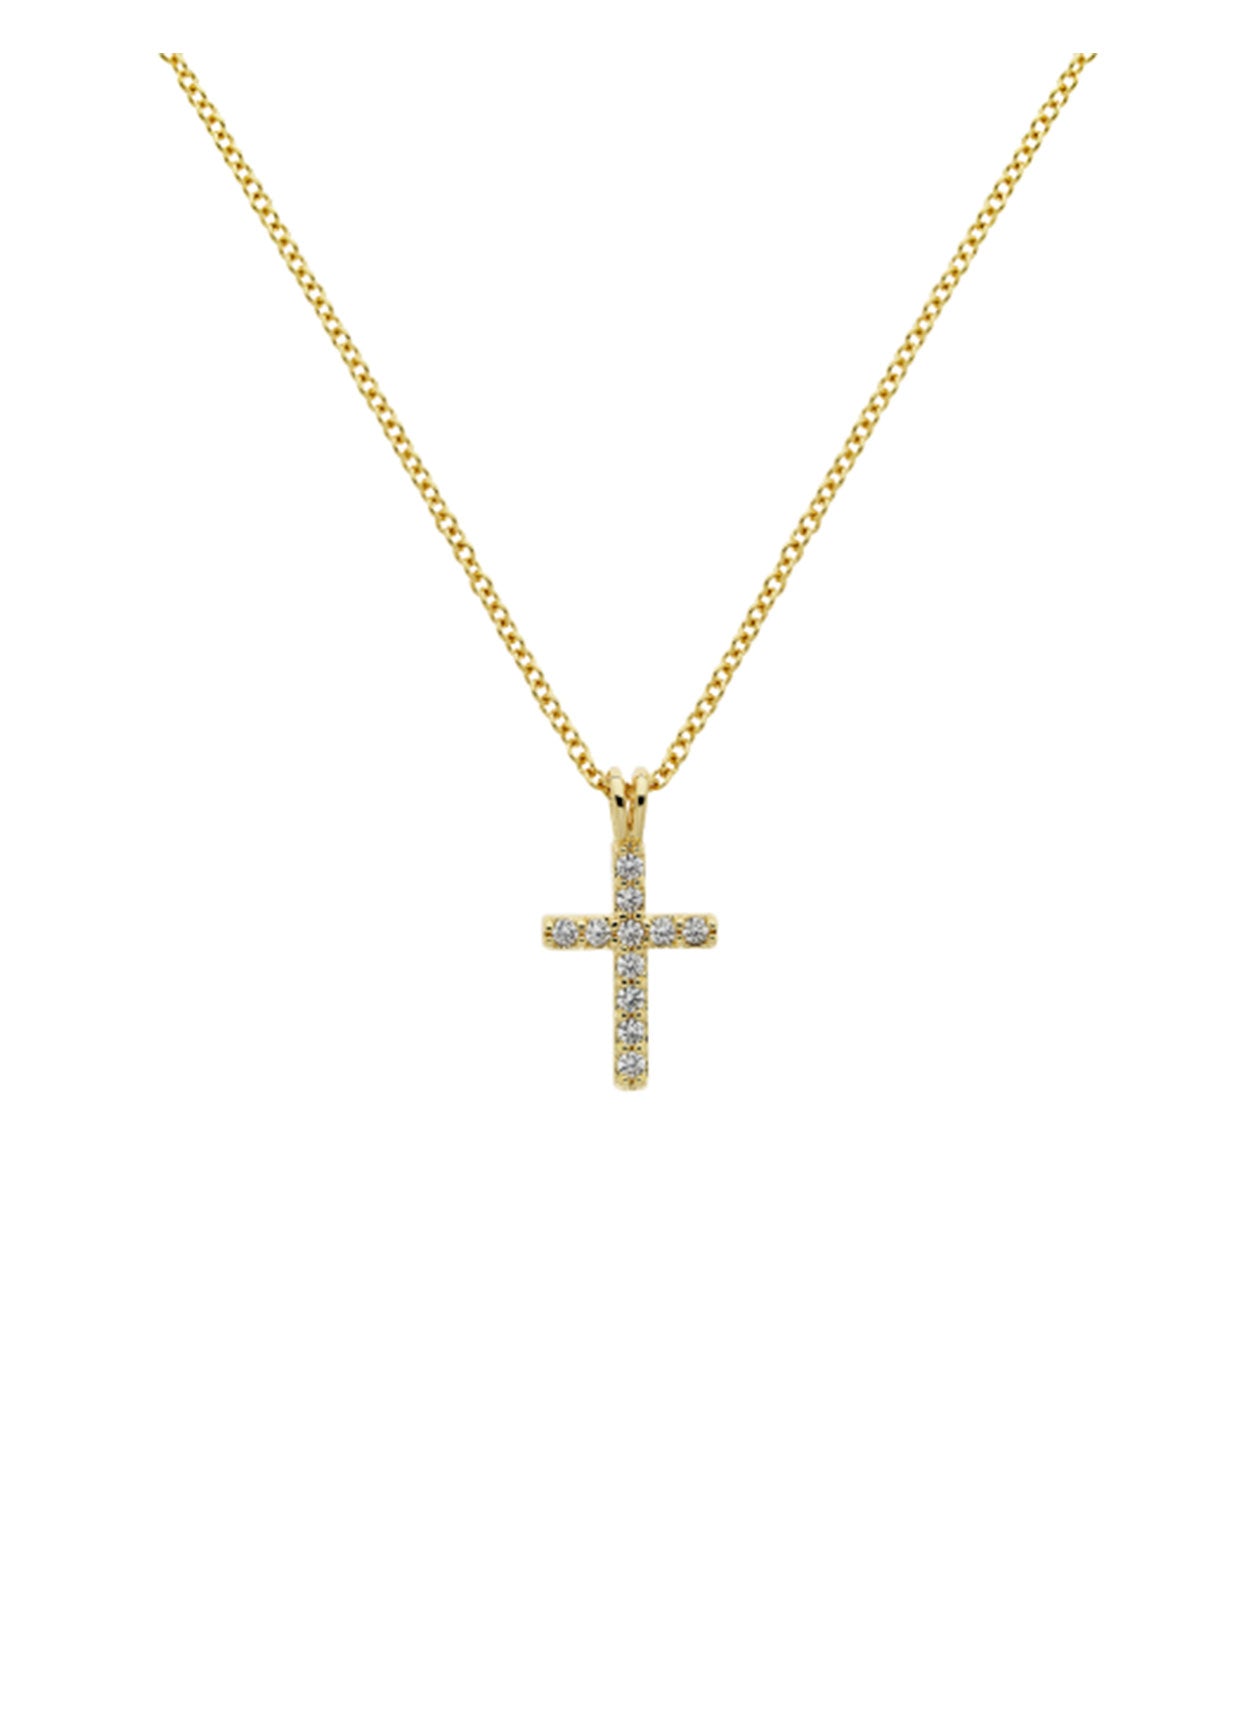 Gold Crystal Cross Pendant Necklace